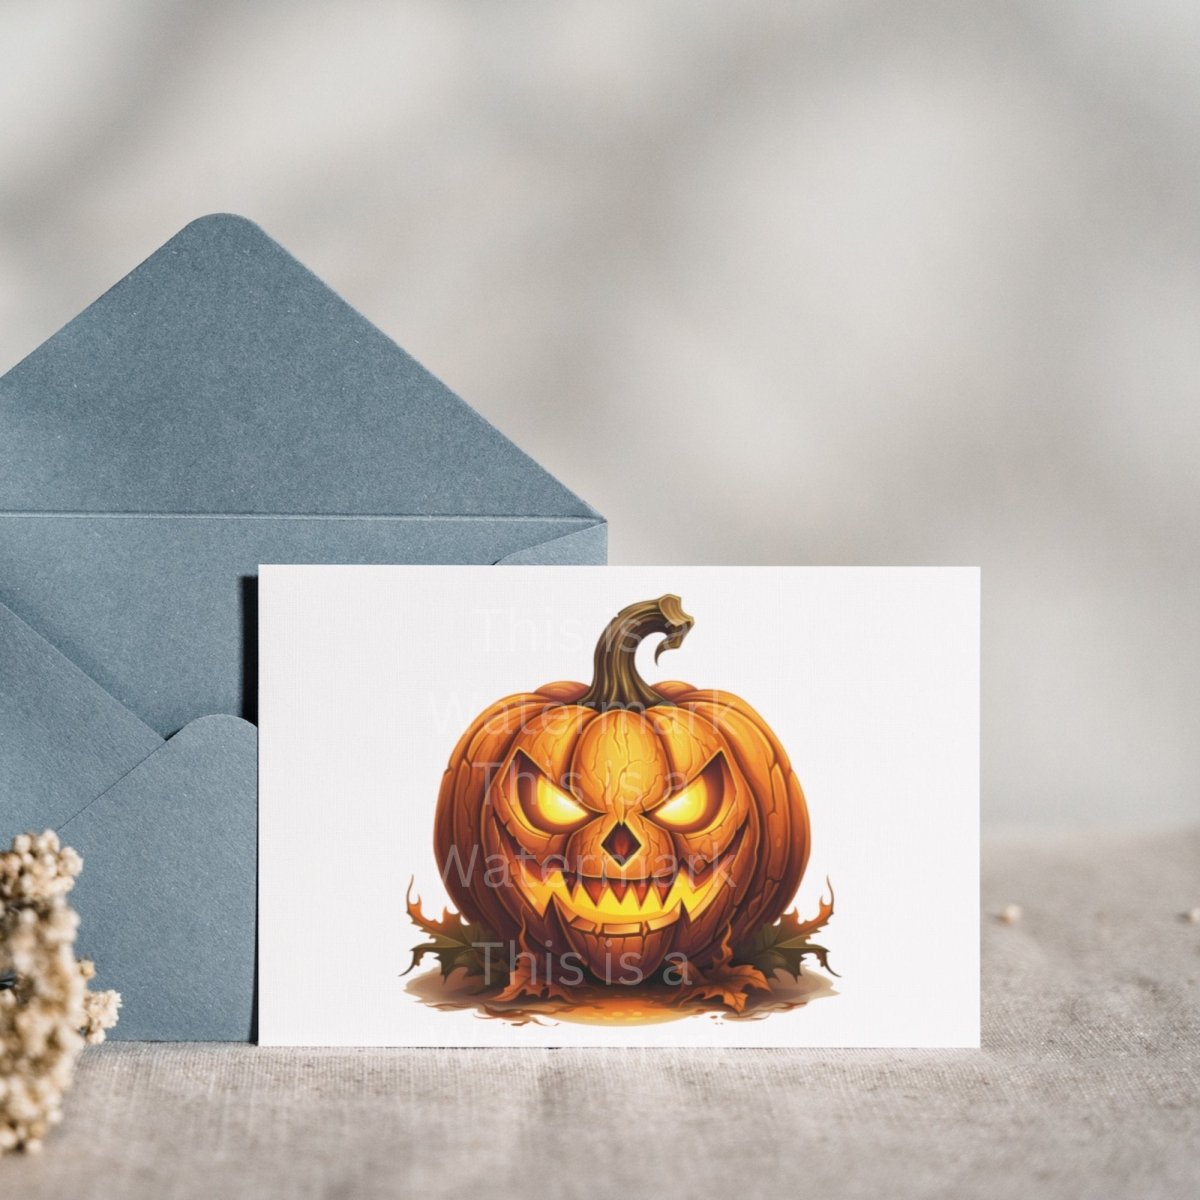 Jack-o-Lantern Halloween Pumpkins 7+7 PNG Clipart Bundle Halloween Invitation Card Design Paper Crafting Book Clip Art Scary Graphics - Everything Pixel